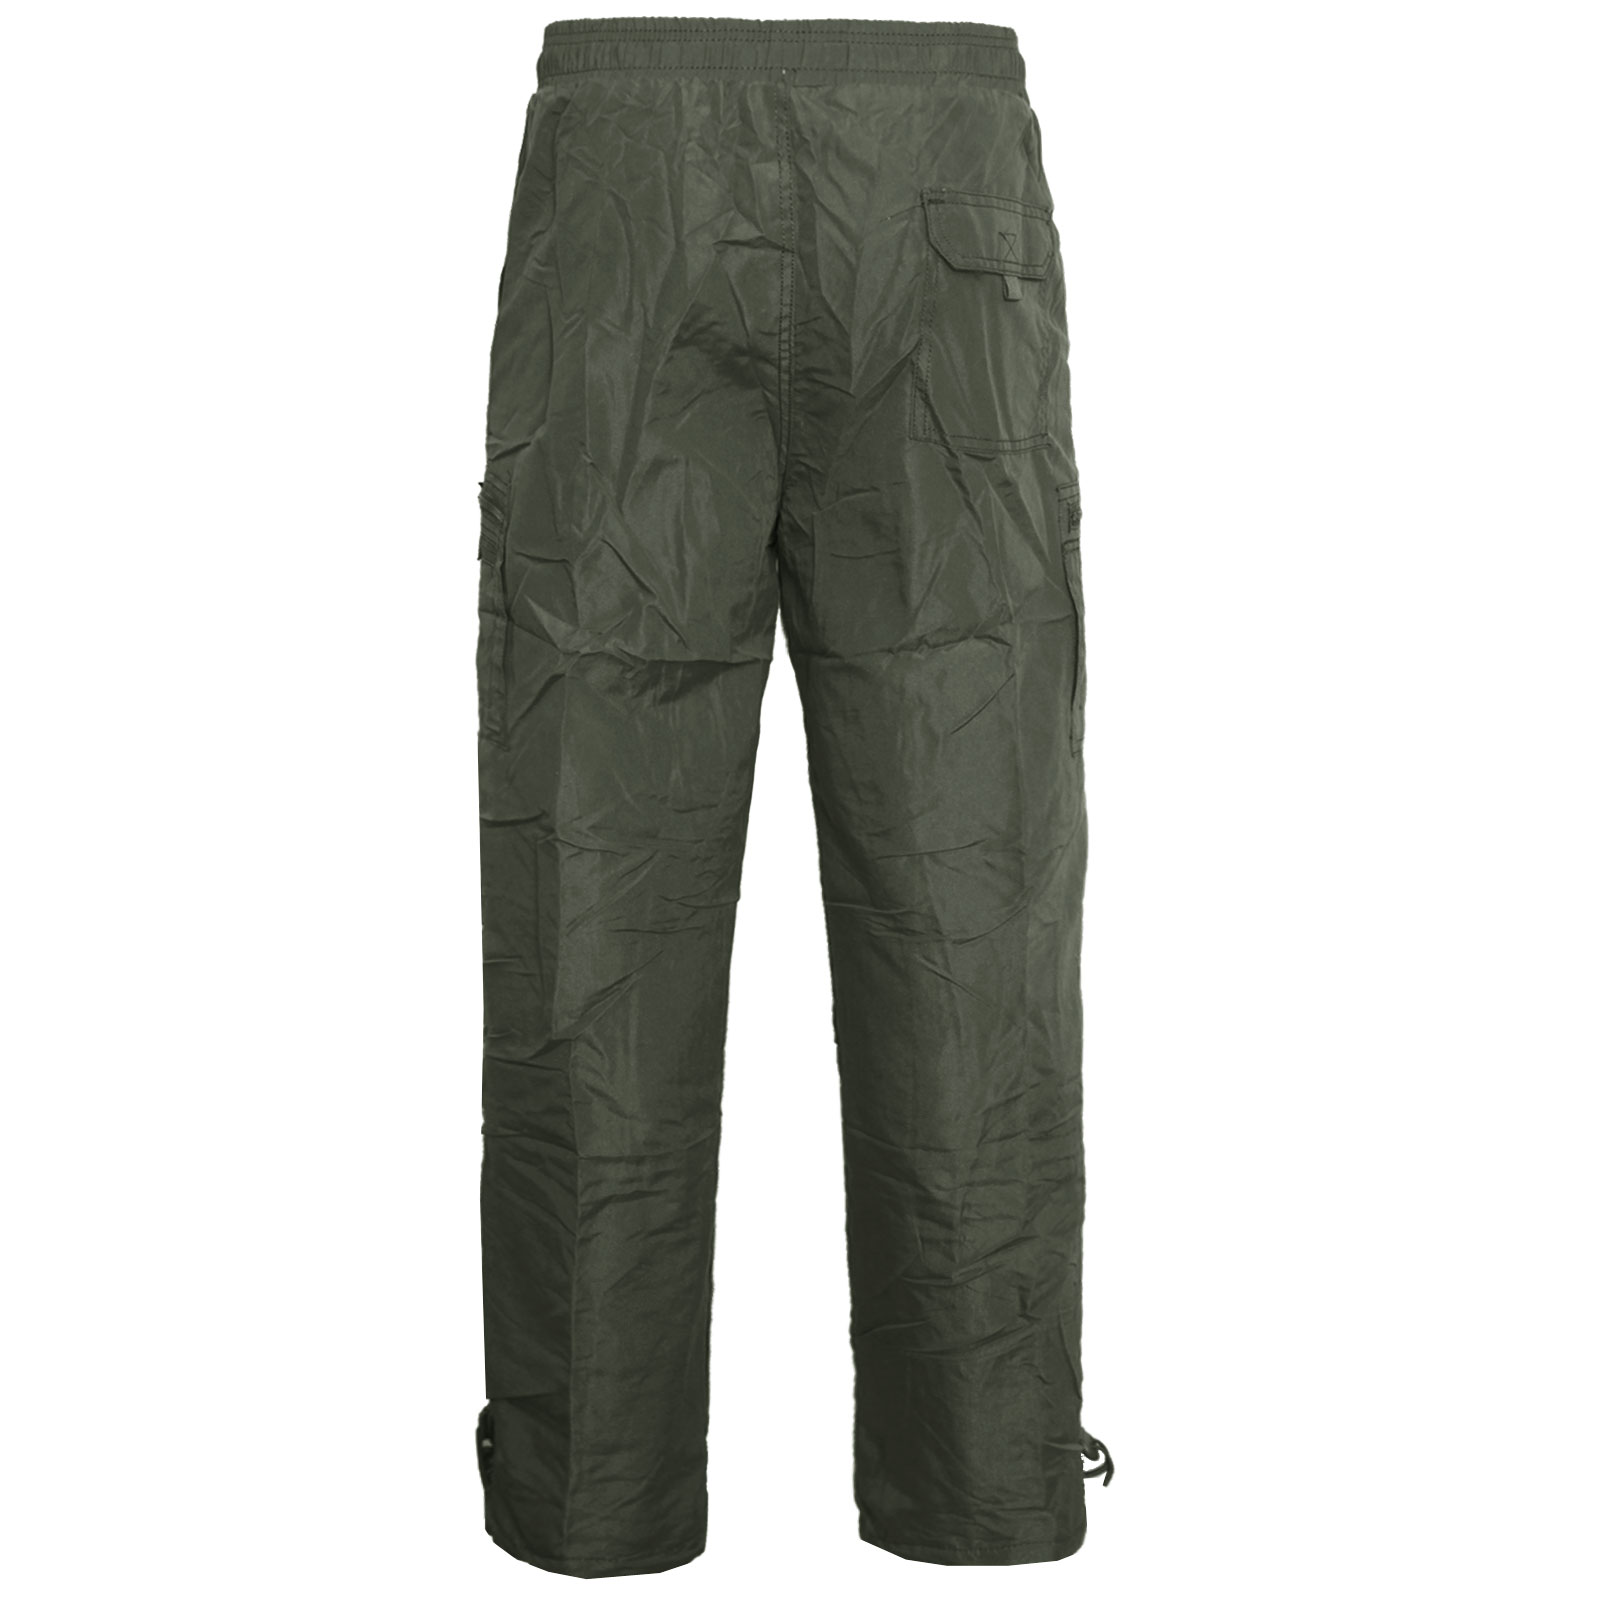 Details about   Mens Fleece Lined Thermal Cargo Pants Elasticated Combat Bottoms Work Trousers 